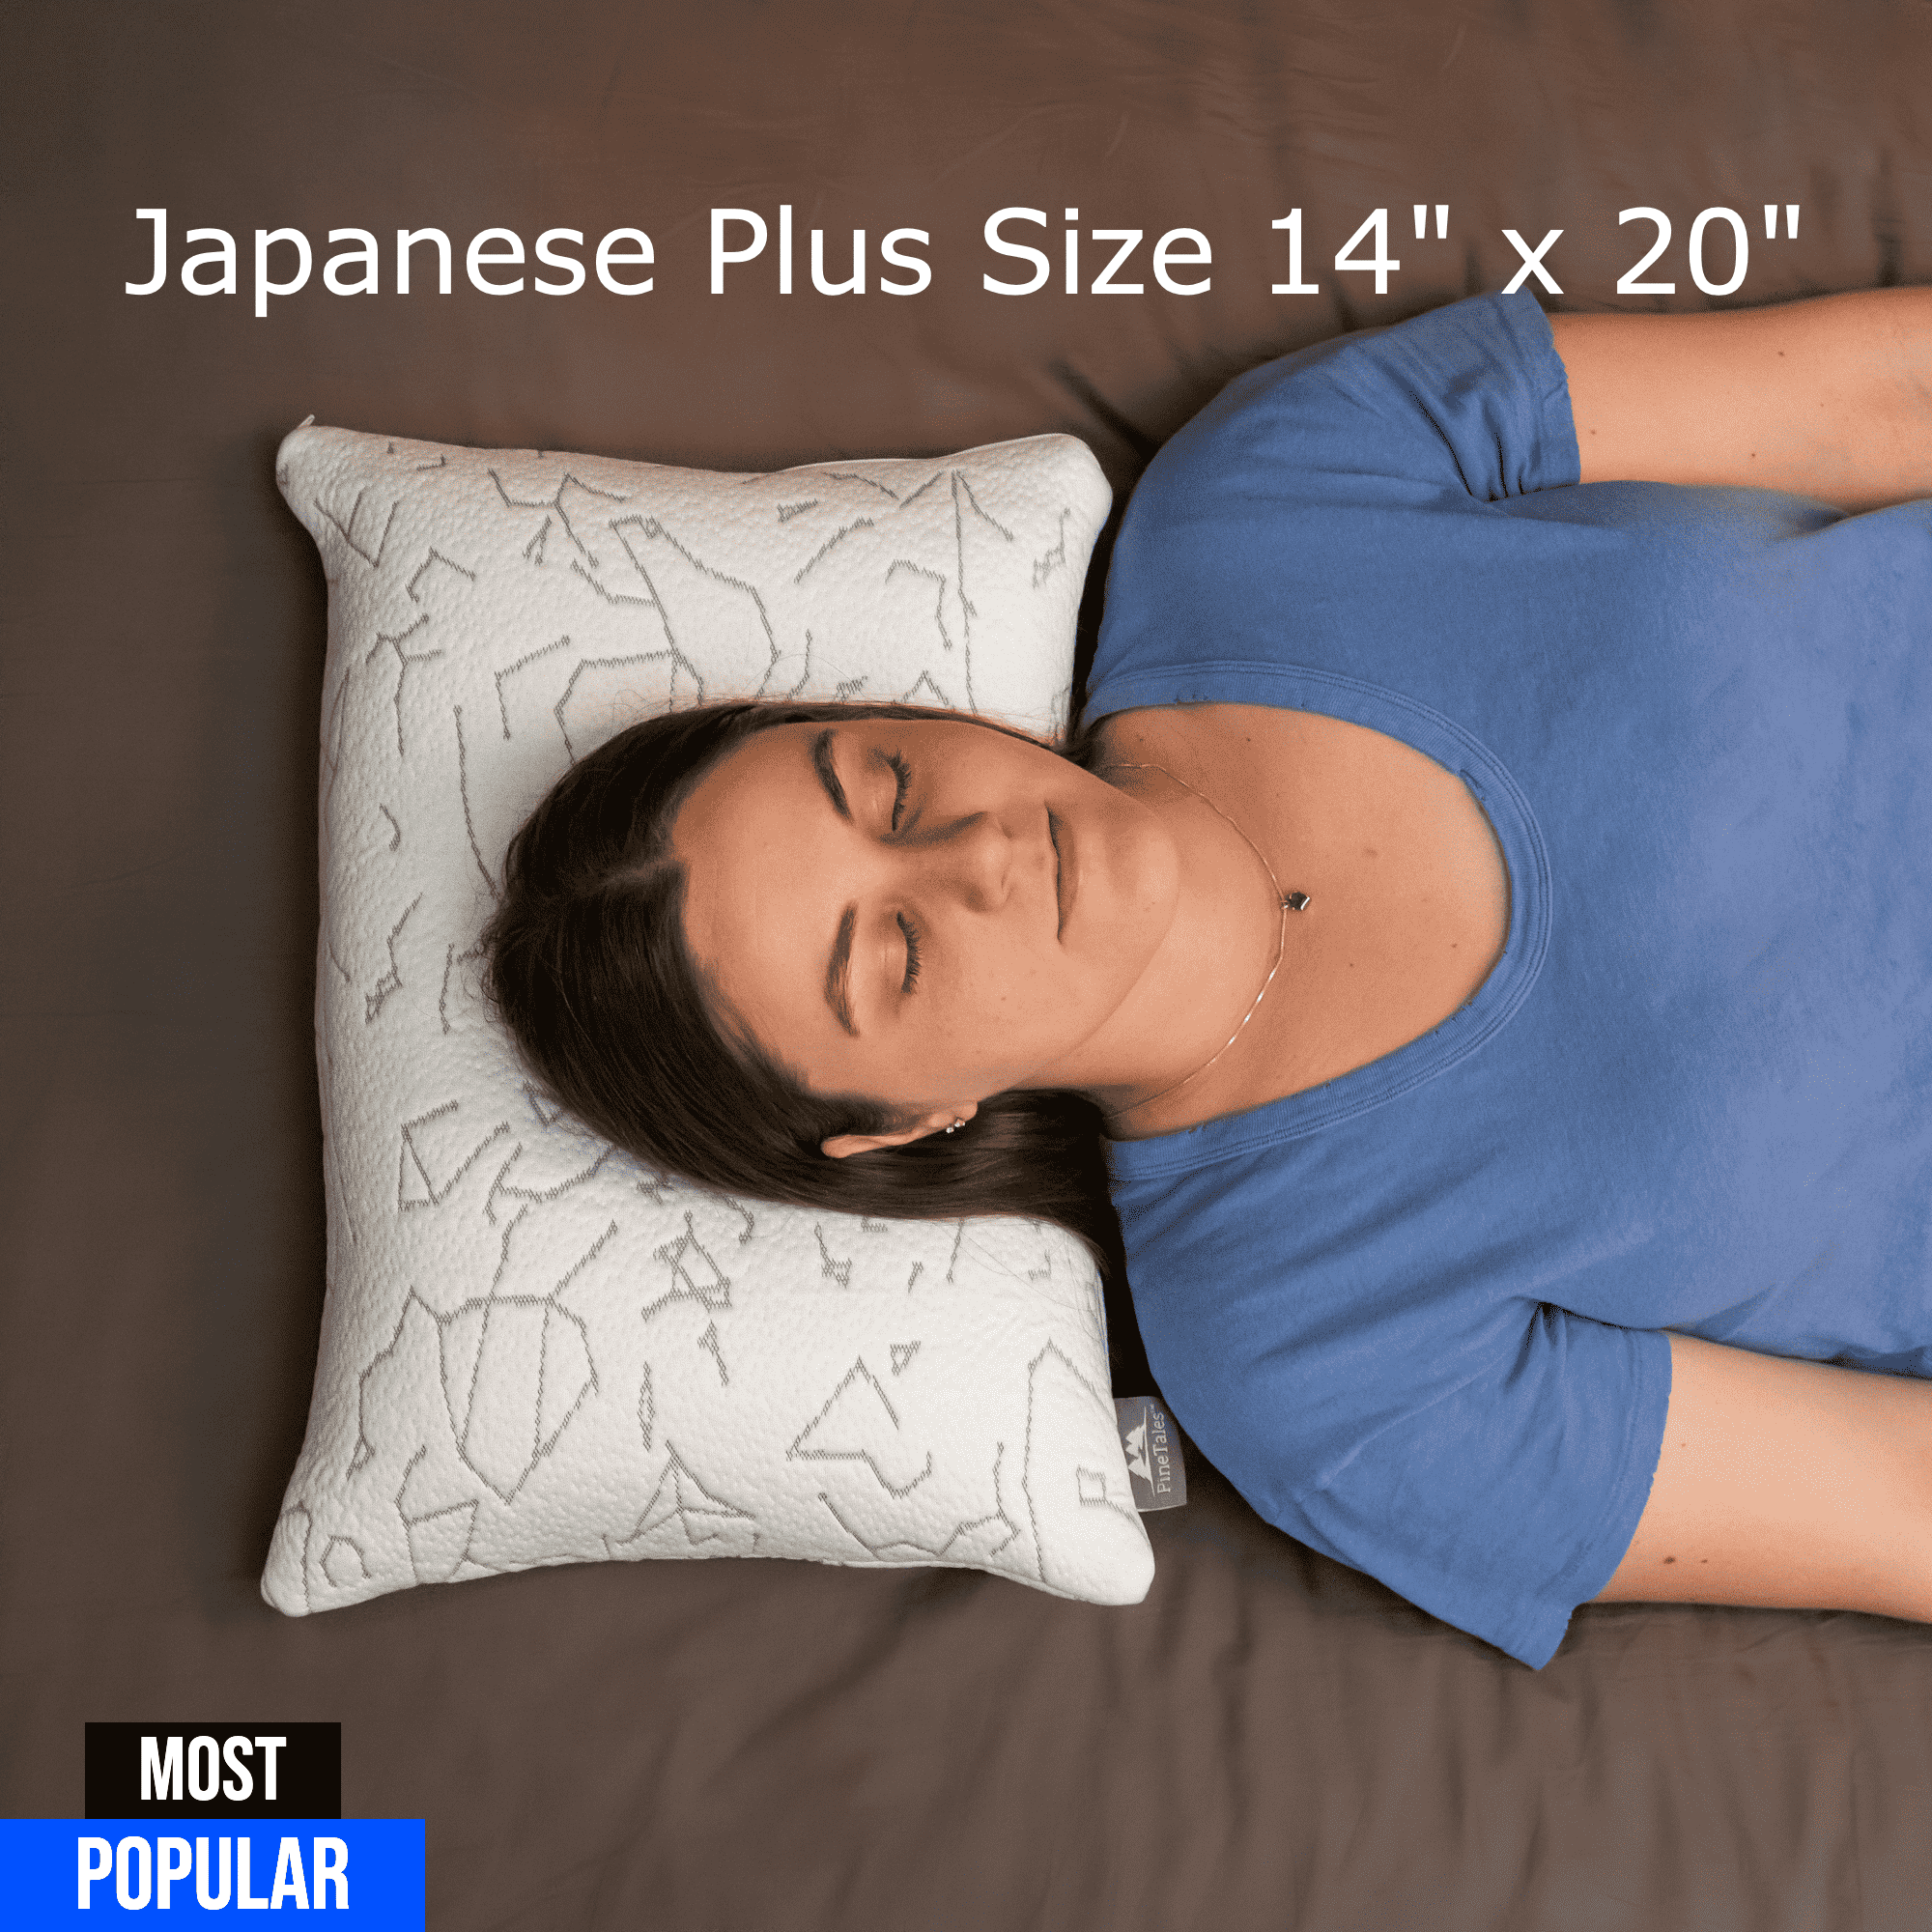 Buckwheat Pillow Size Guide - Japanese Plus Size 14 inches x 20 inches - Woman